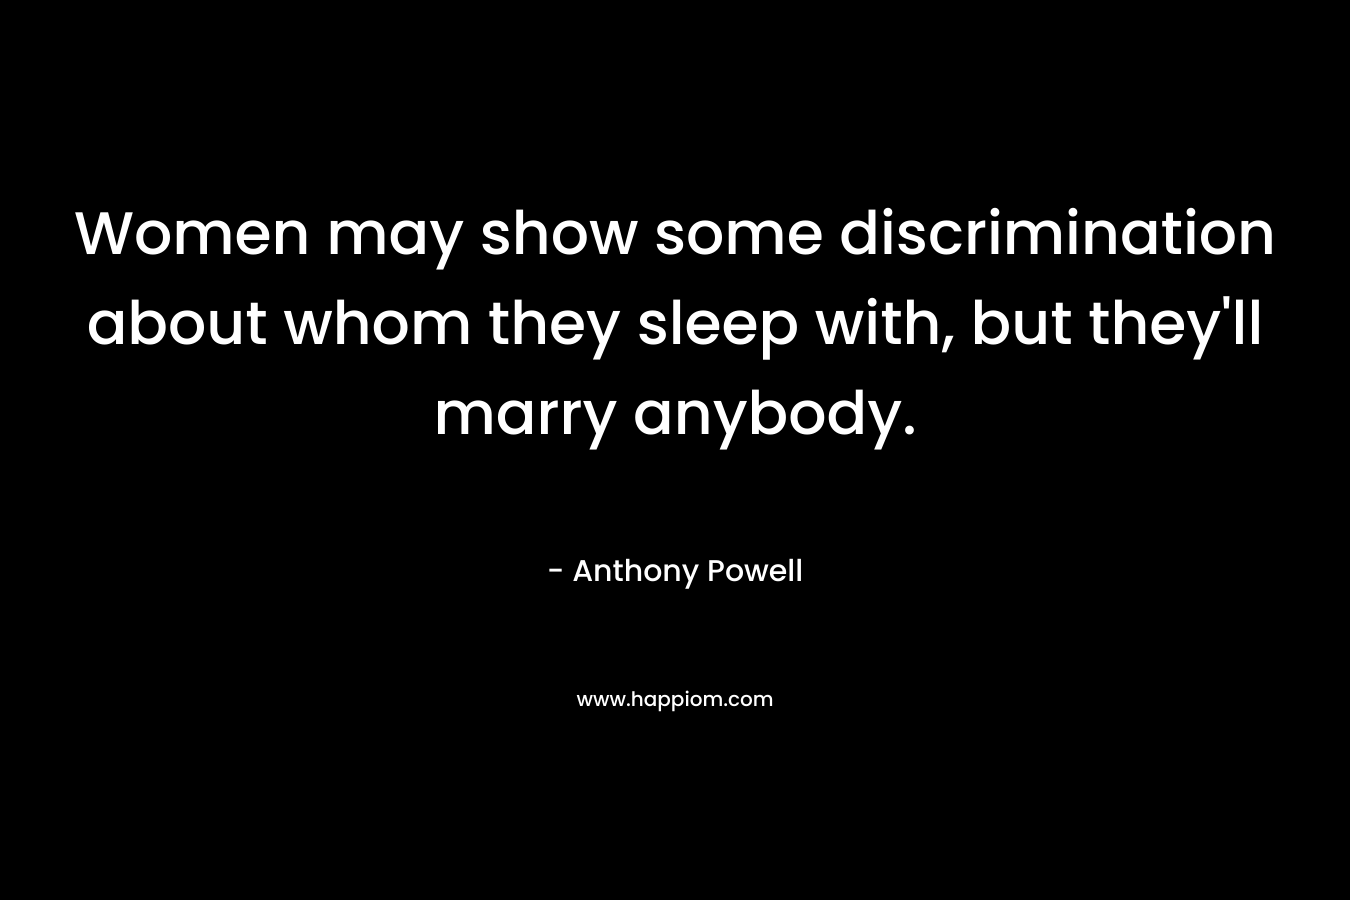 Women may show some discrimination about whom they sleep with, but they'll marry anybody.